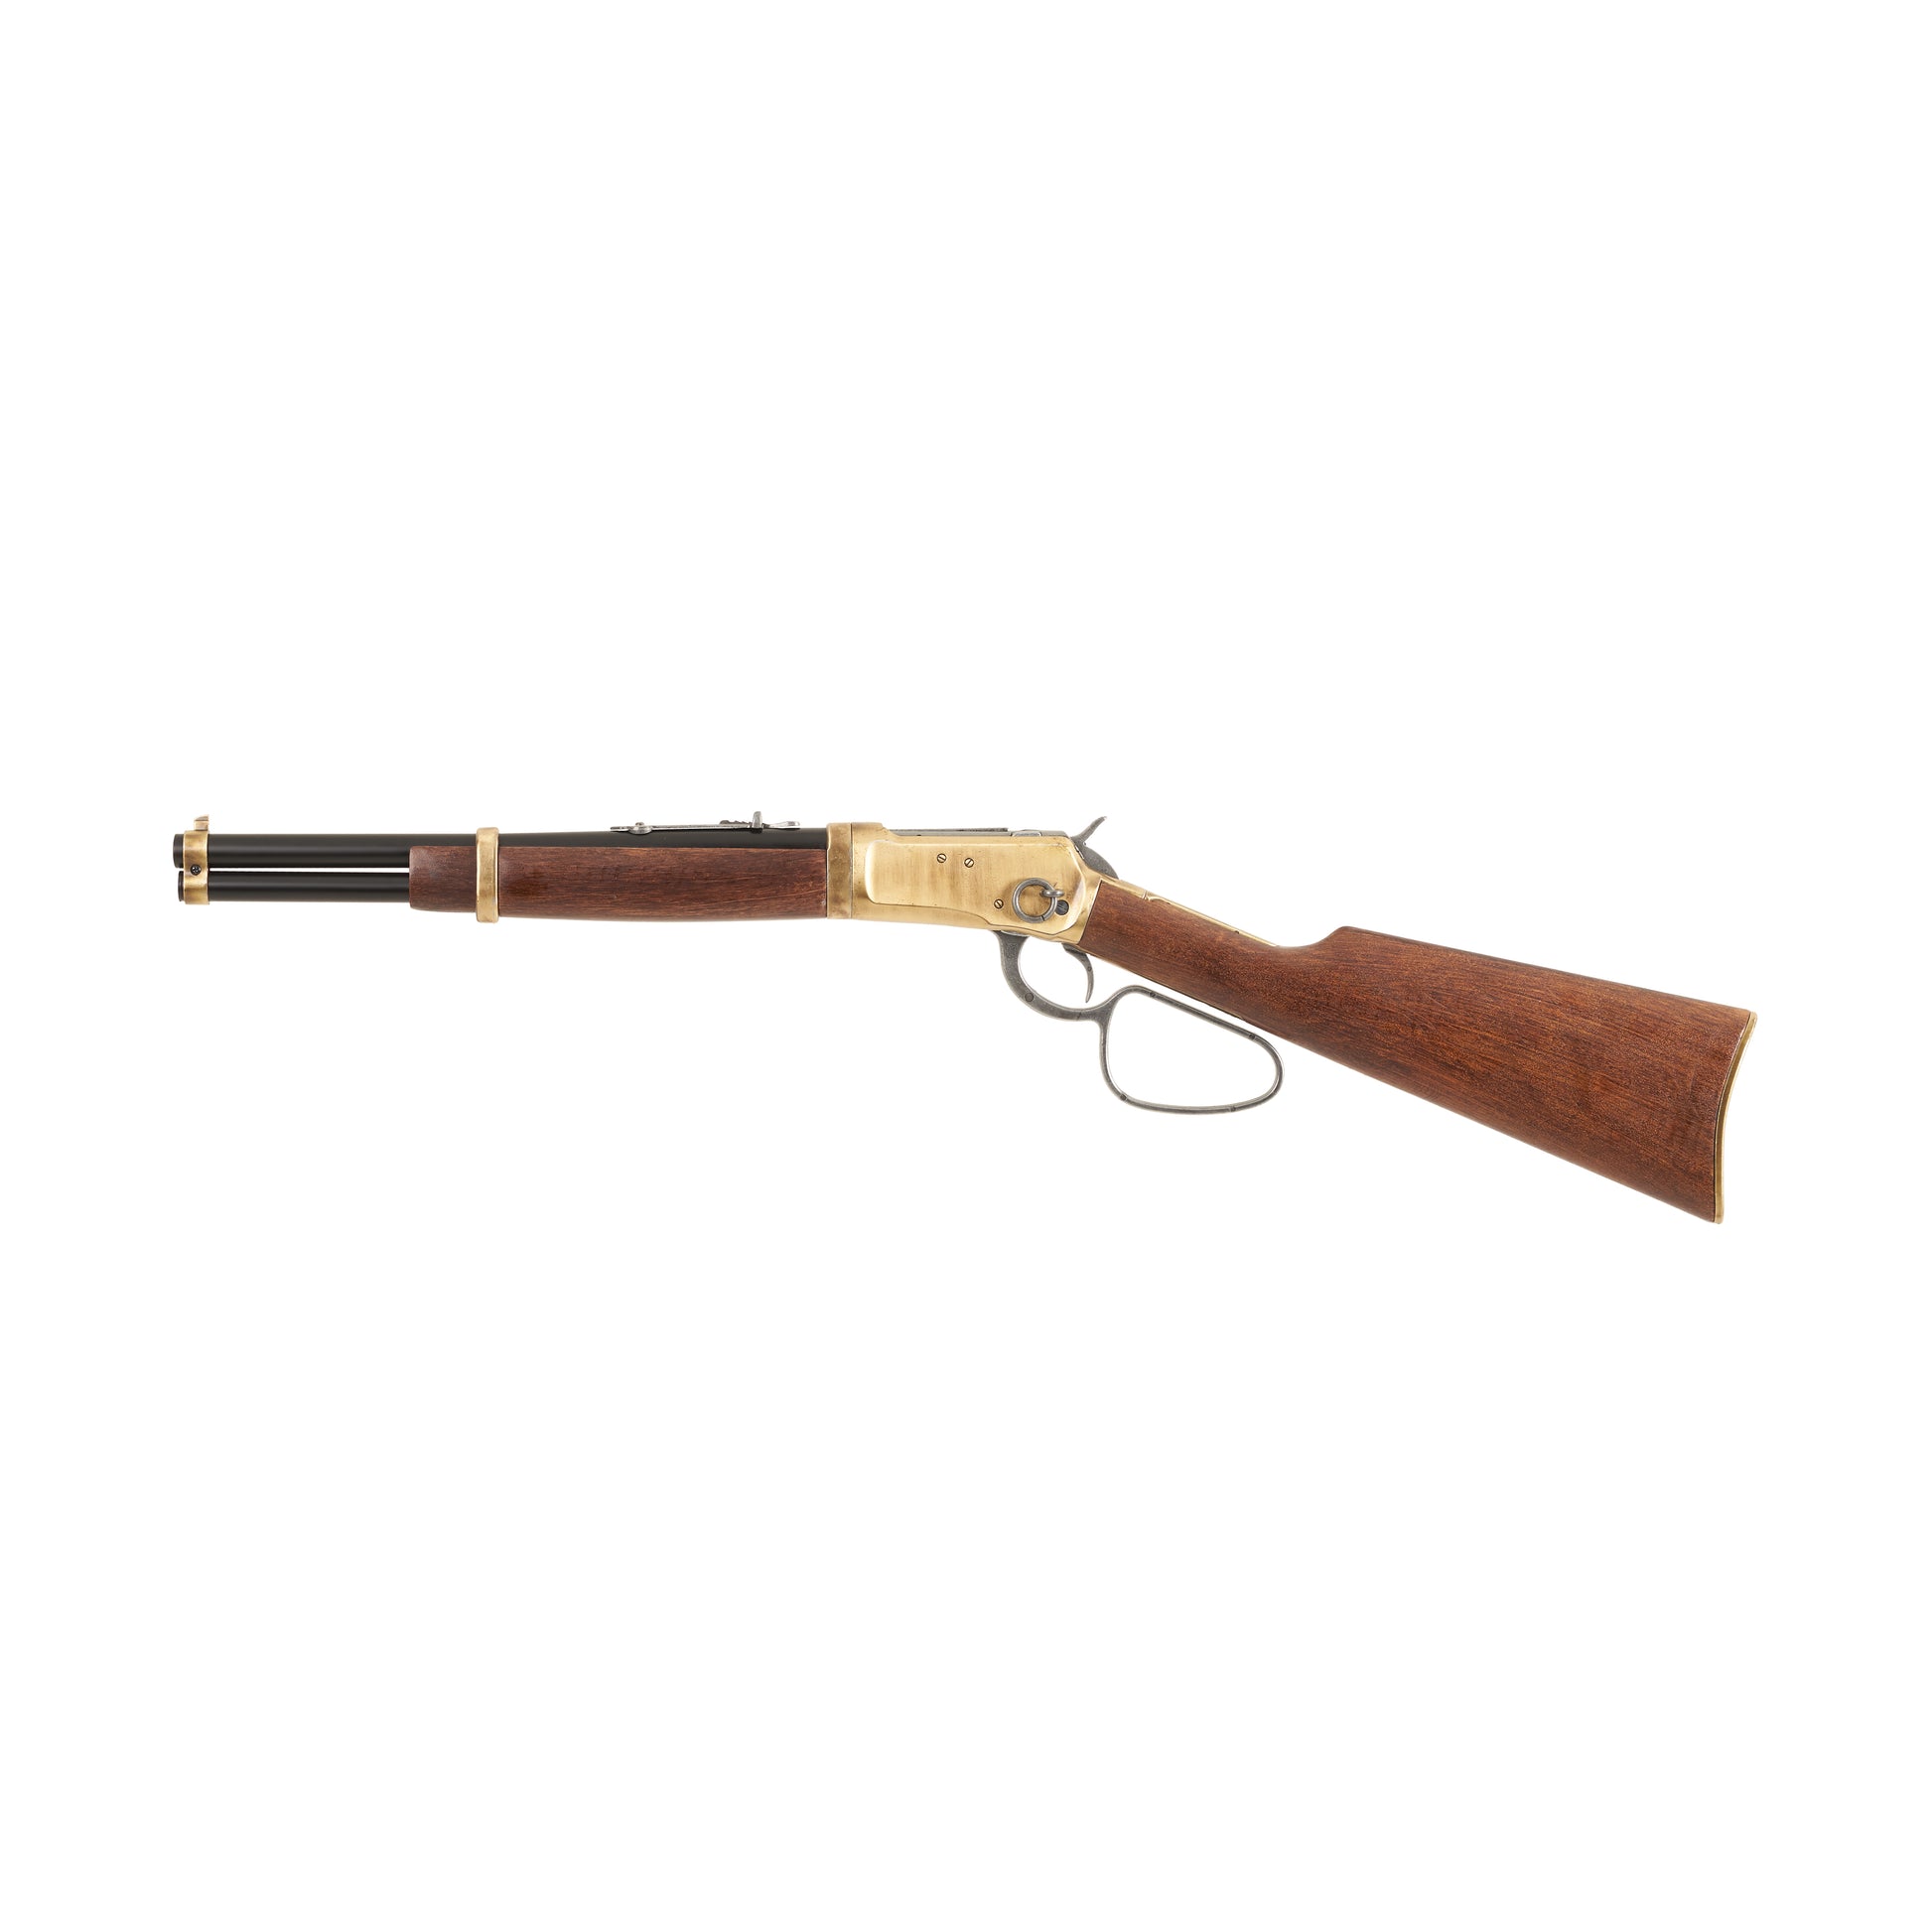 Left side  view of 1892 Old West Rifle with brass mechanism and trim, wood stock, and black barrel.